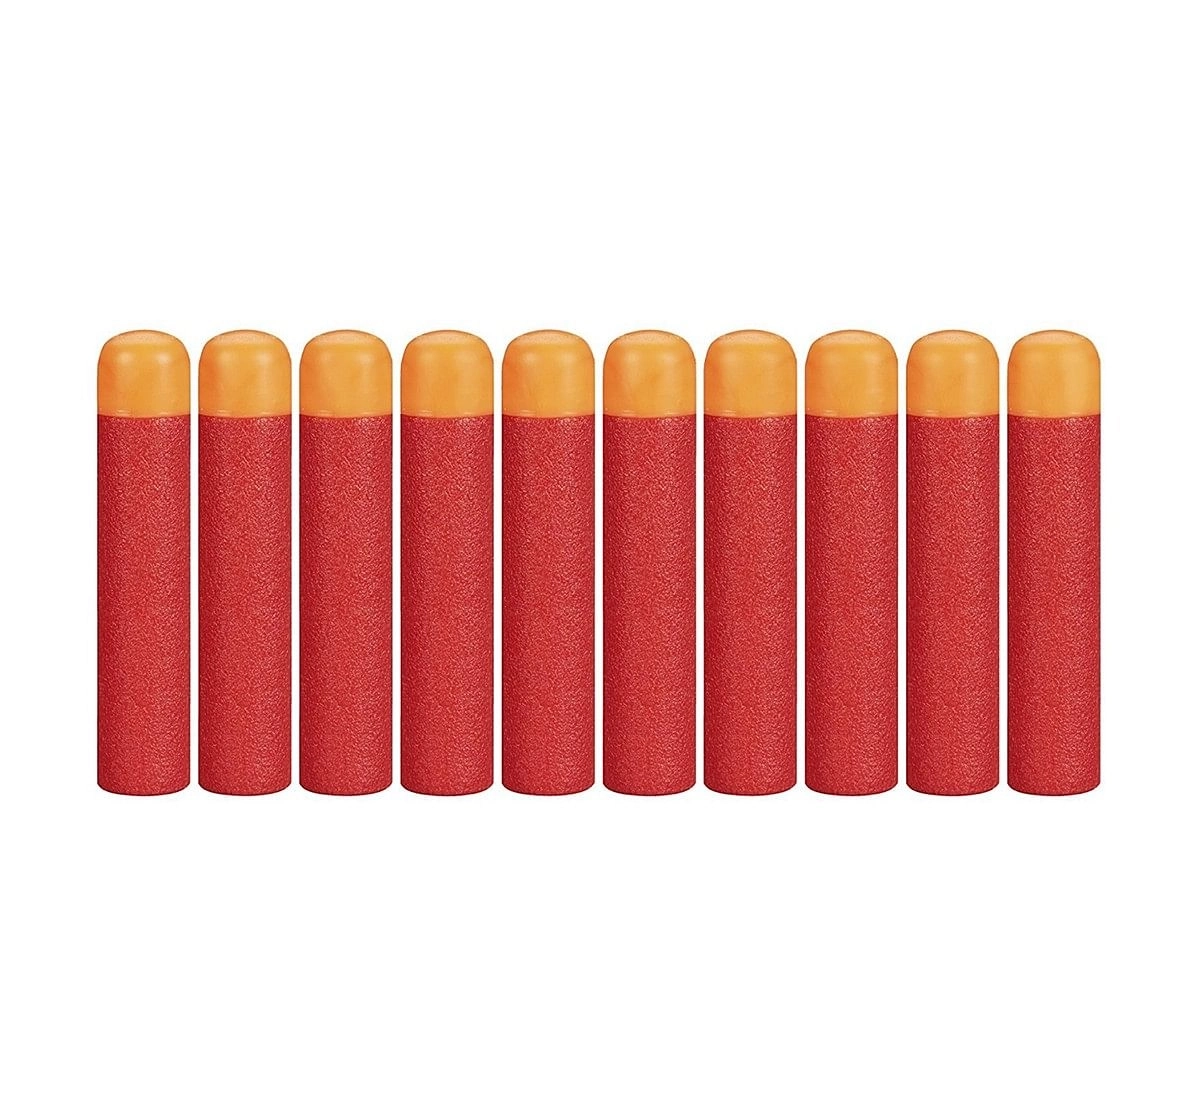 Nerf Darts 10-Pack Refill For Nerf Mega Blasters -  8Y+ (Red)